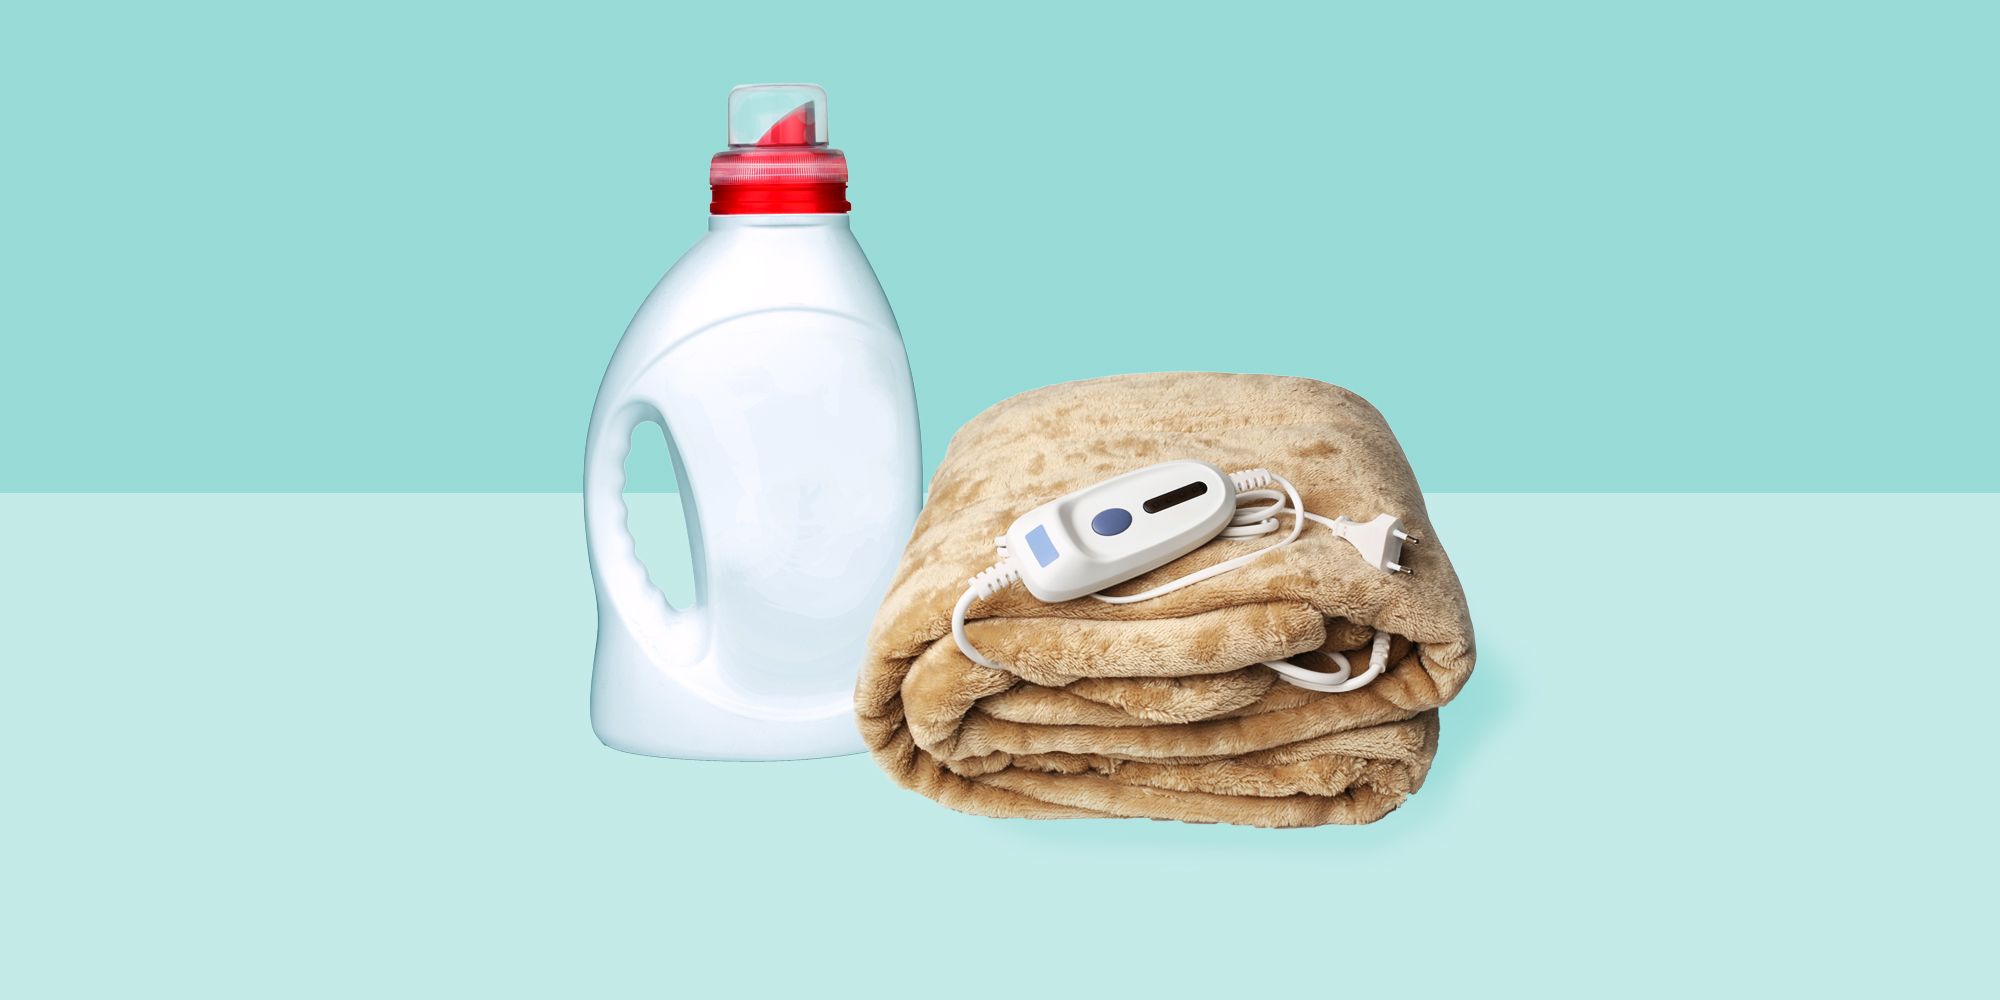 How to Wash an Electric Blanket - Steps to Cleaning an Electric Blanket in  Washing Machine